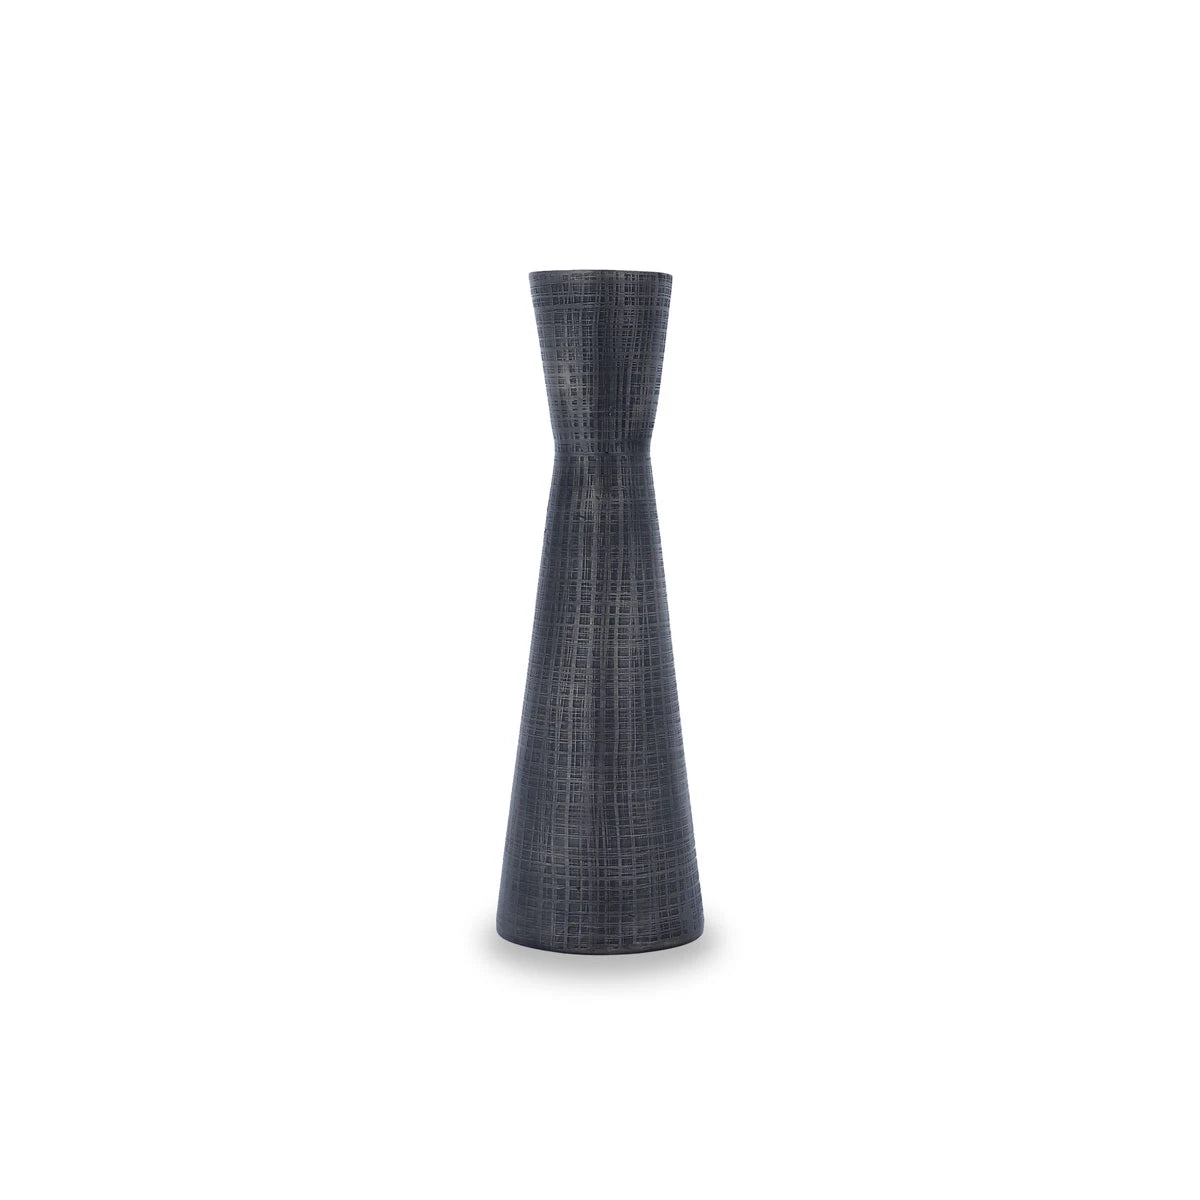 Straight View of Textured Table-Top Brass Vase